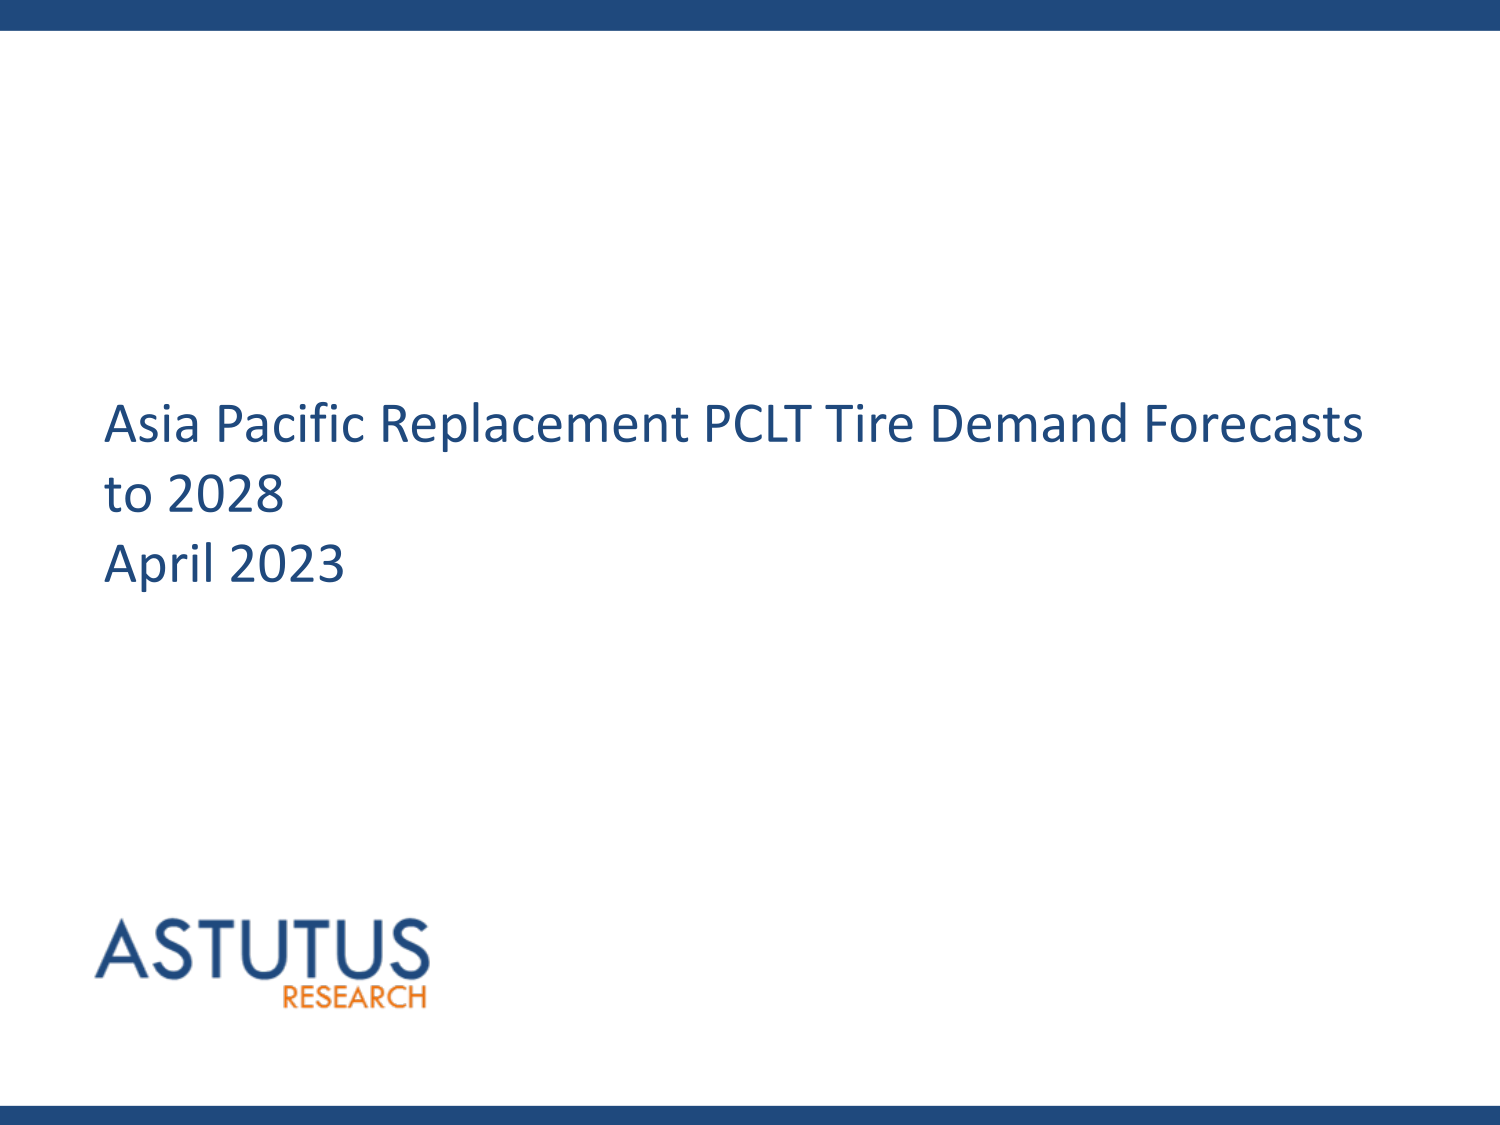 Asia Pacific Replacement PCLT Tire Market Forecasts to 2028